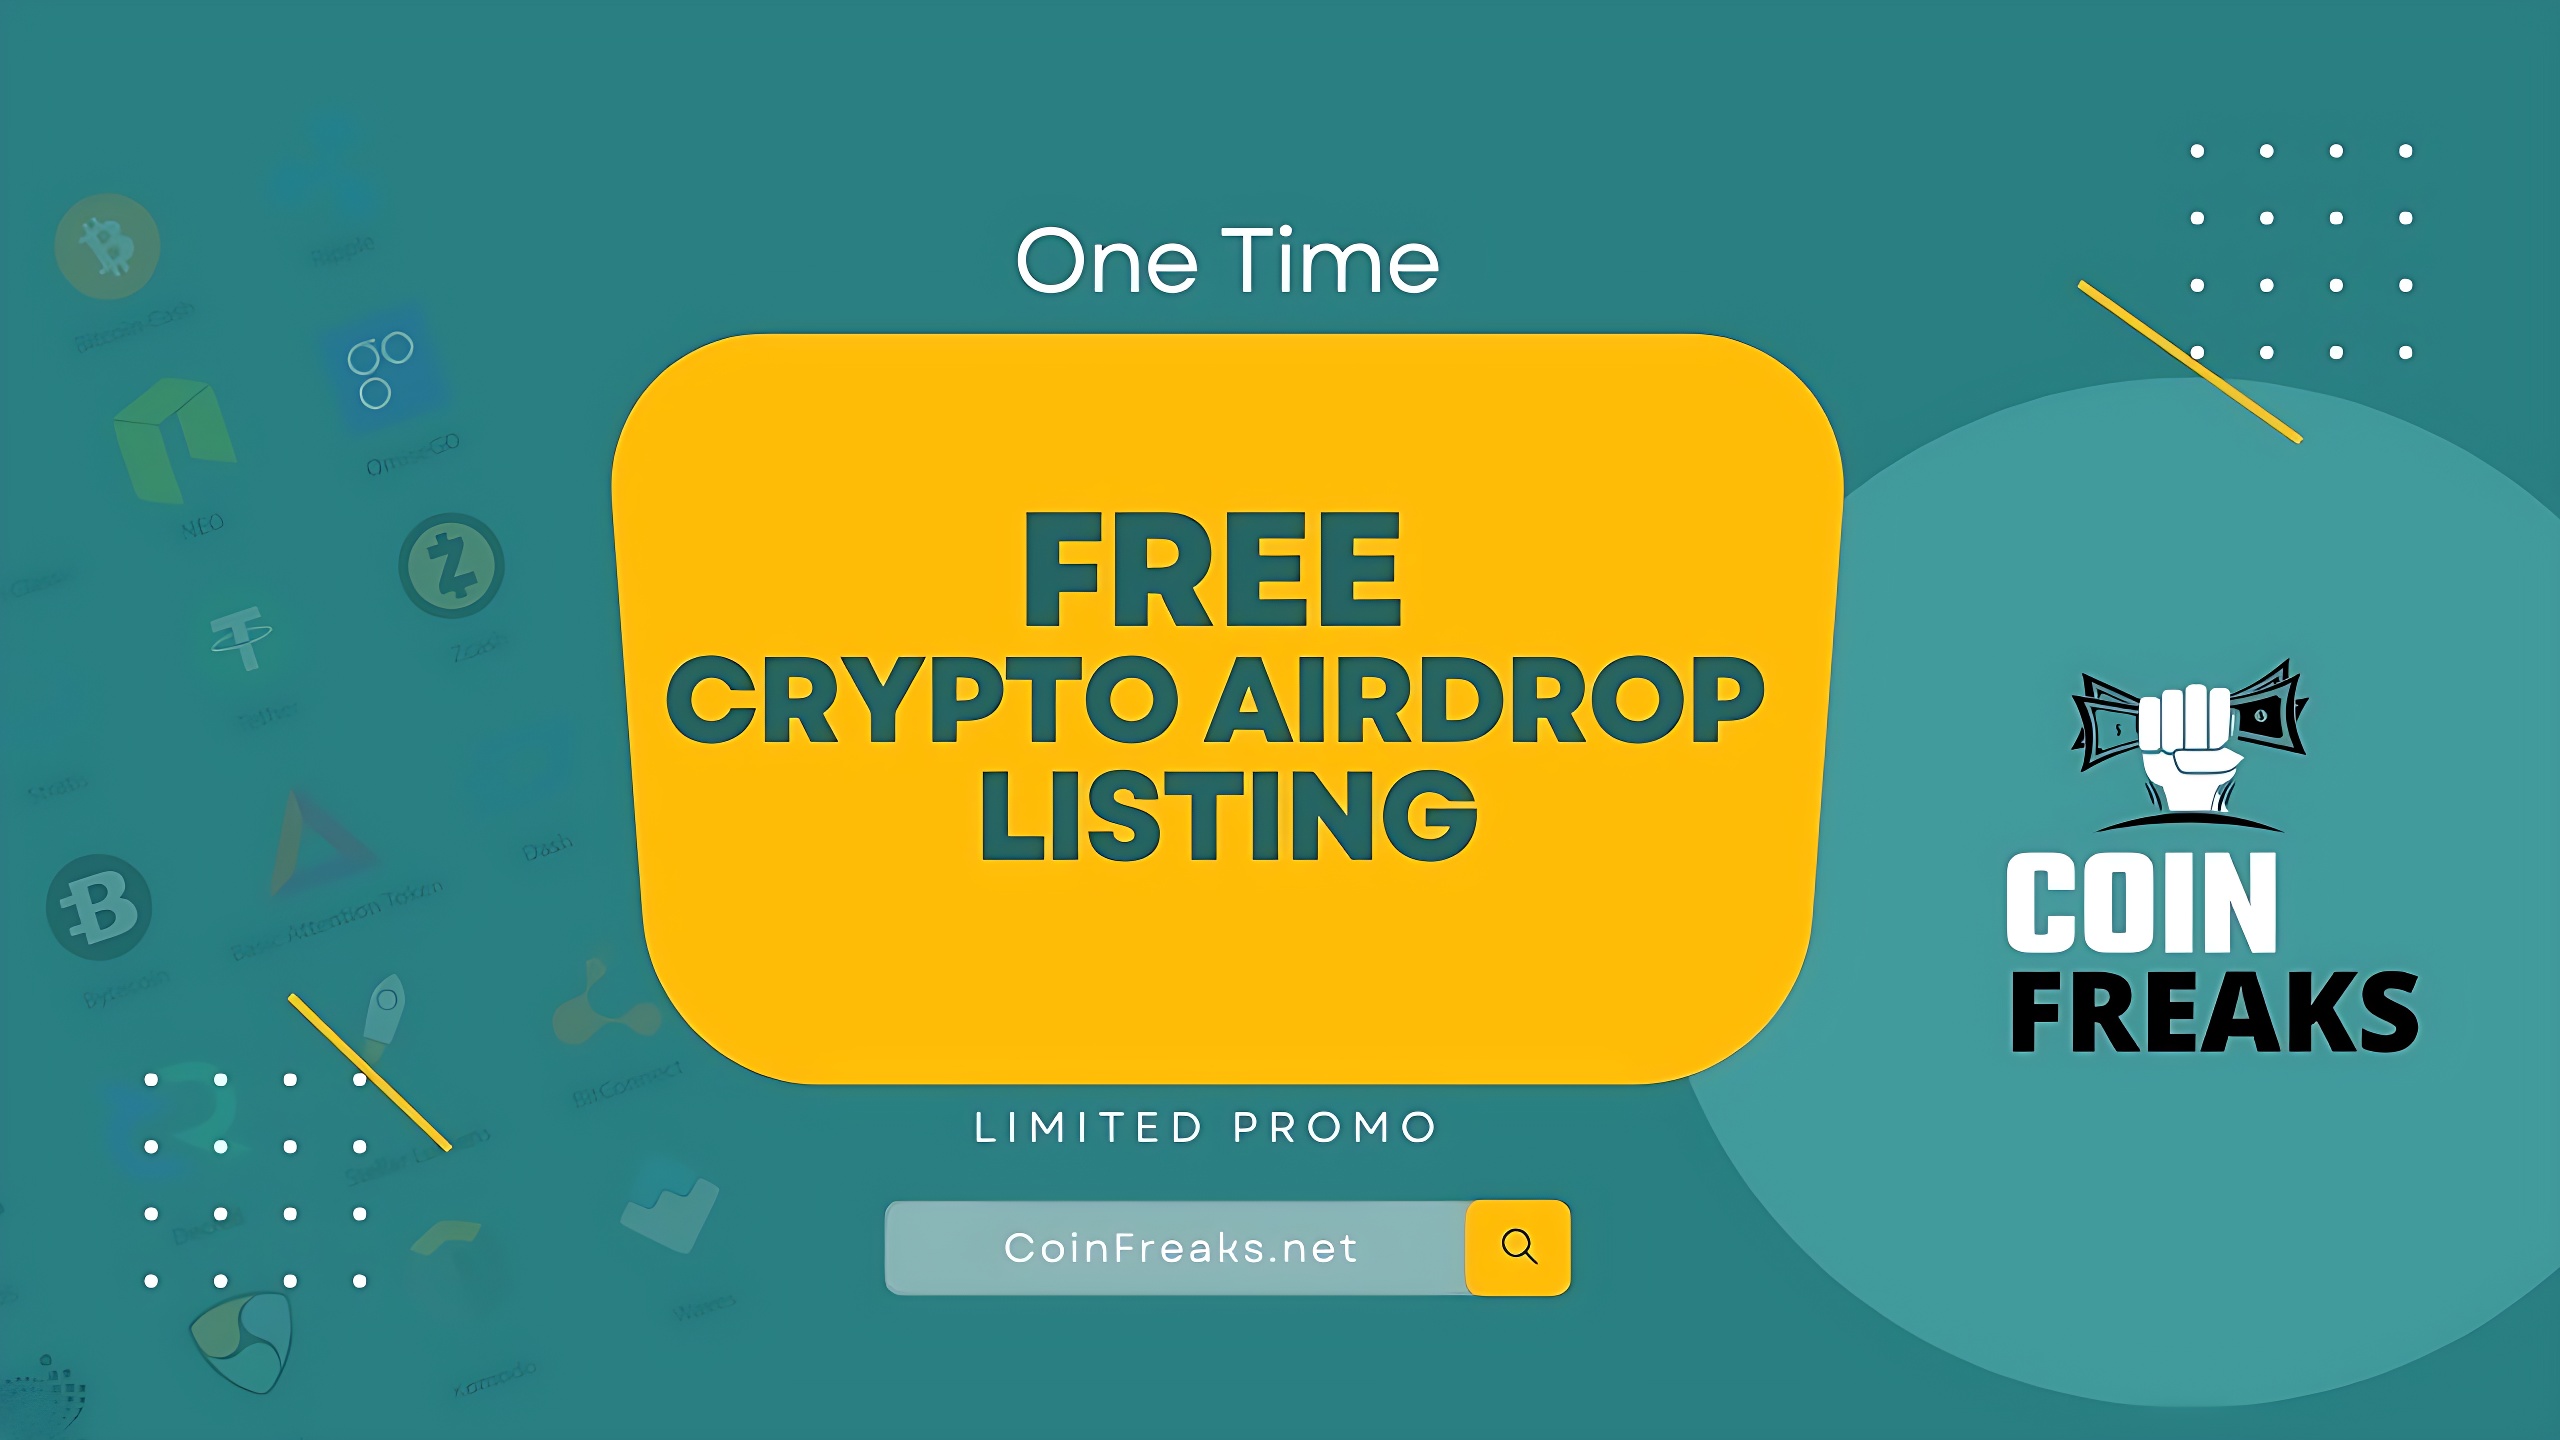 Experience Free Promotion and Airdrop Listing with Coin Freaks